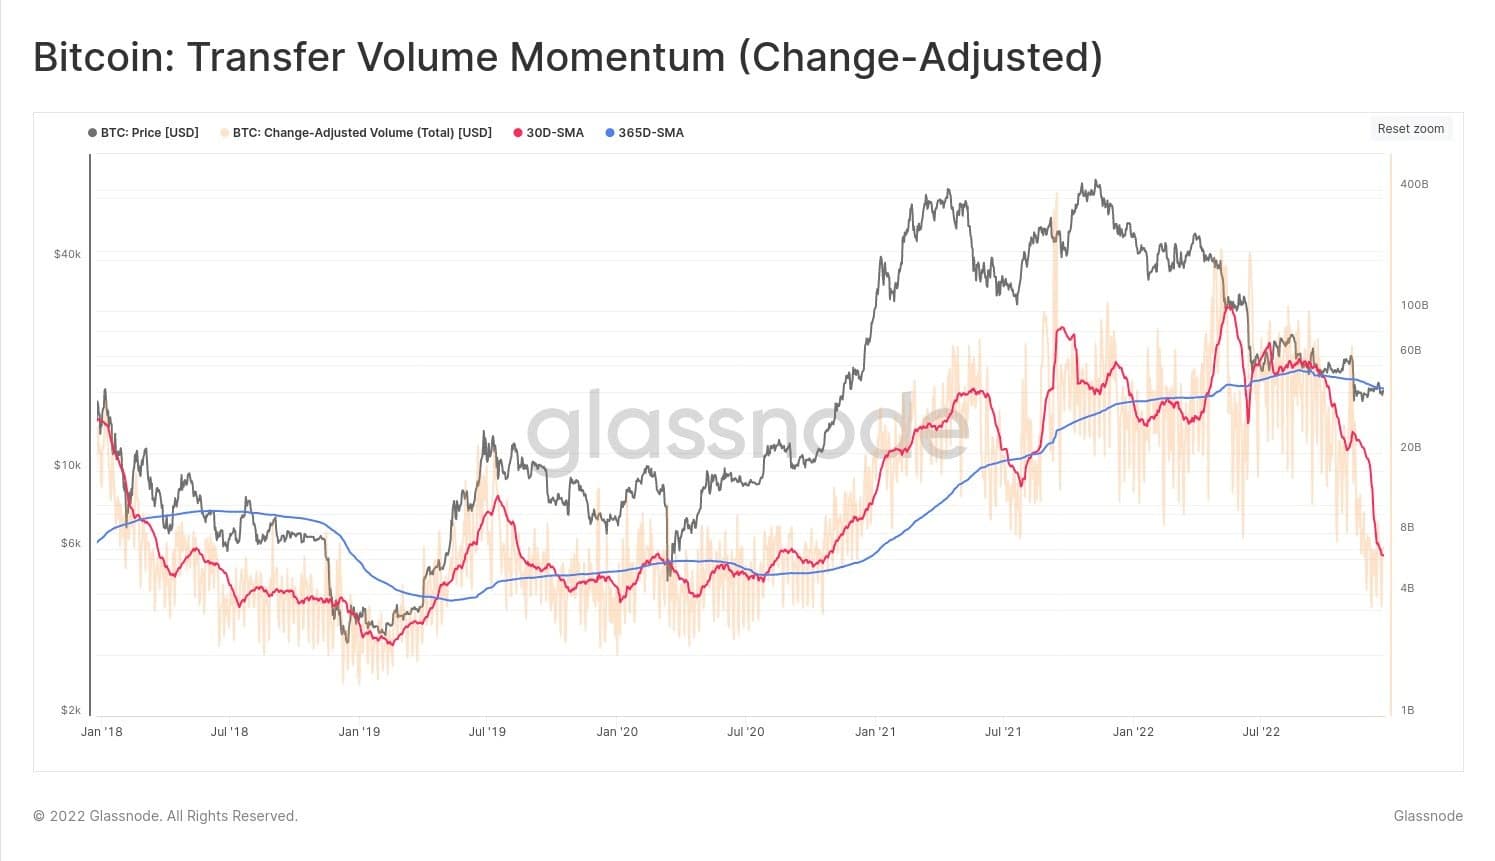 Change in Bitcoin transfer volume since January 2018 (Source: Glassnode)